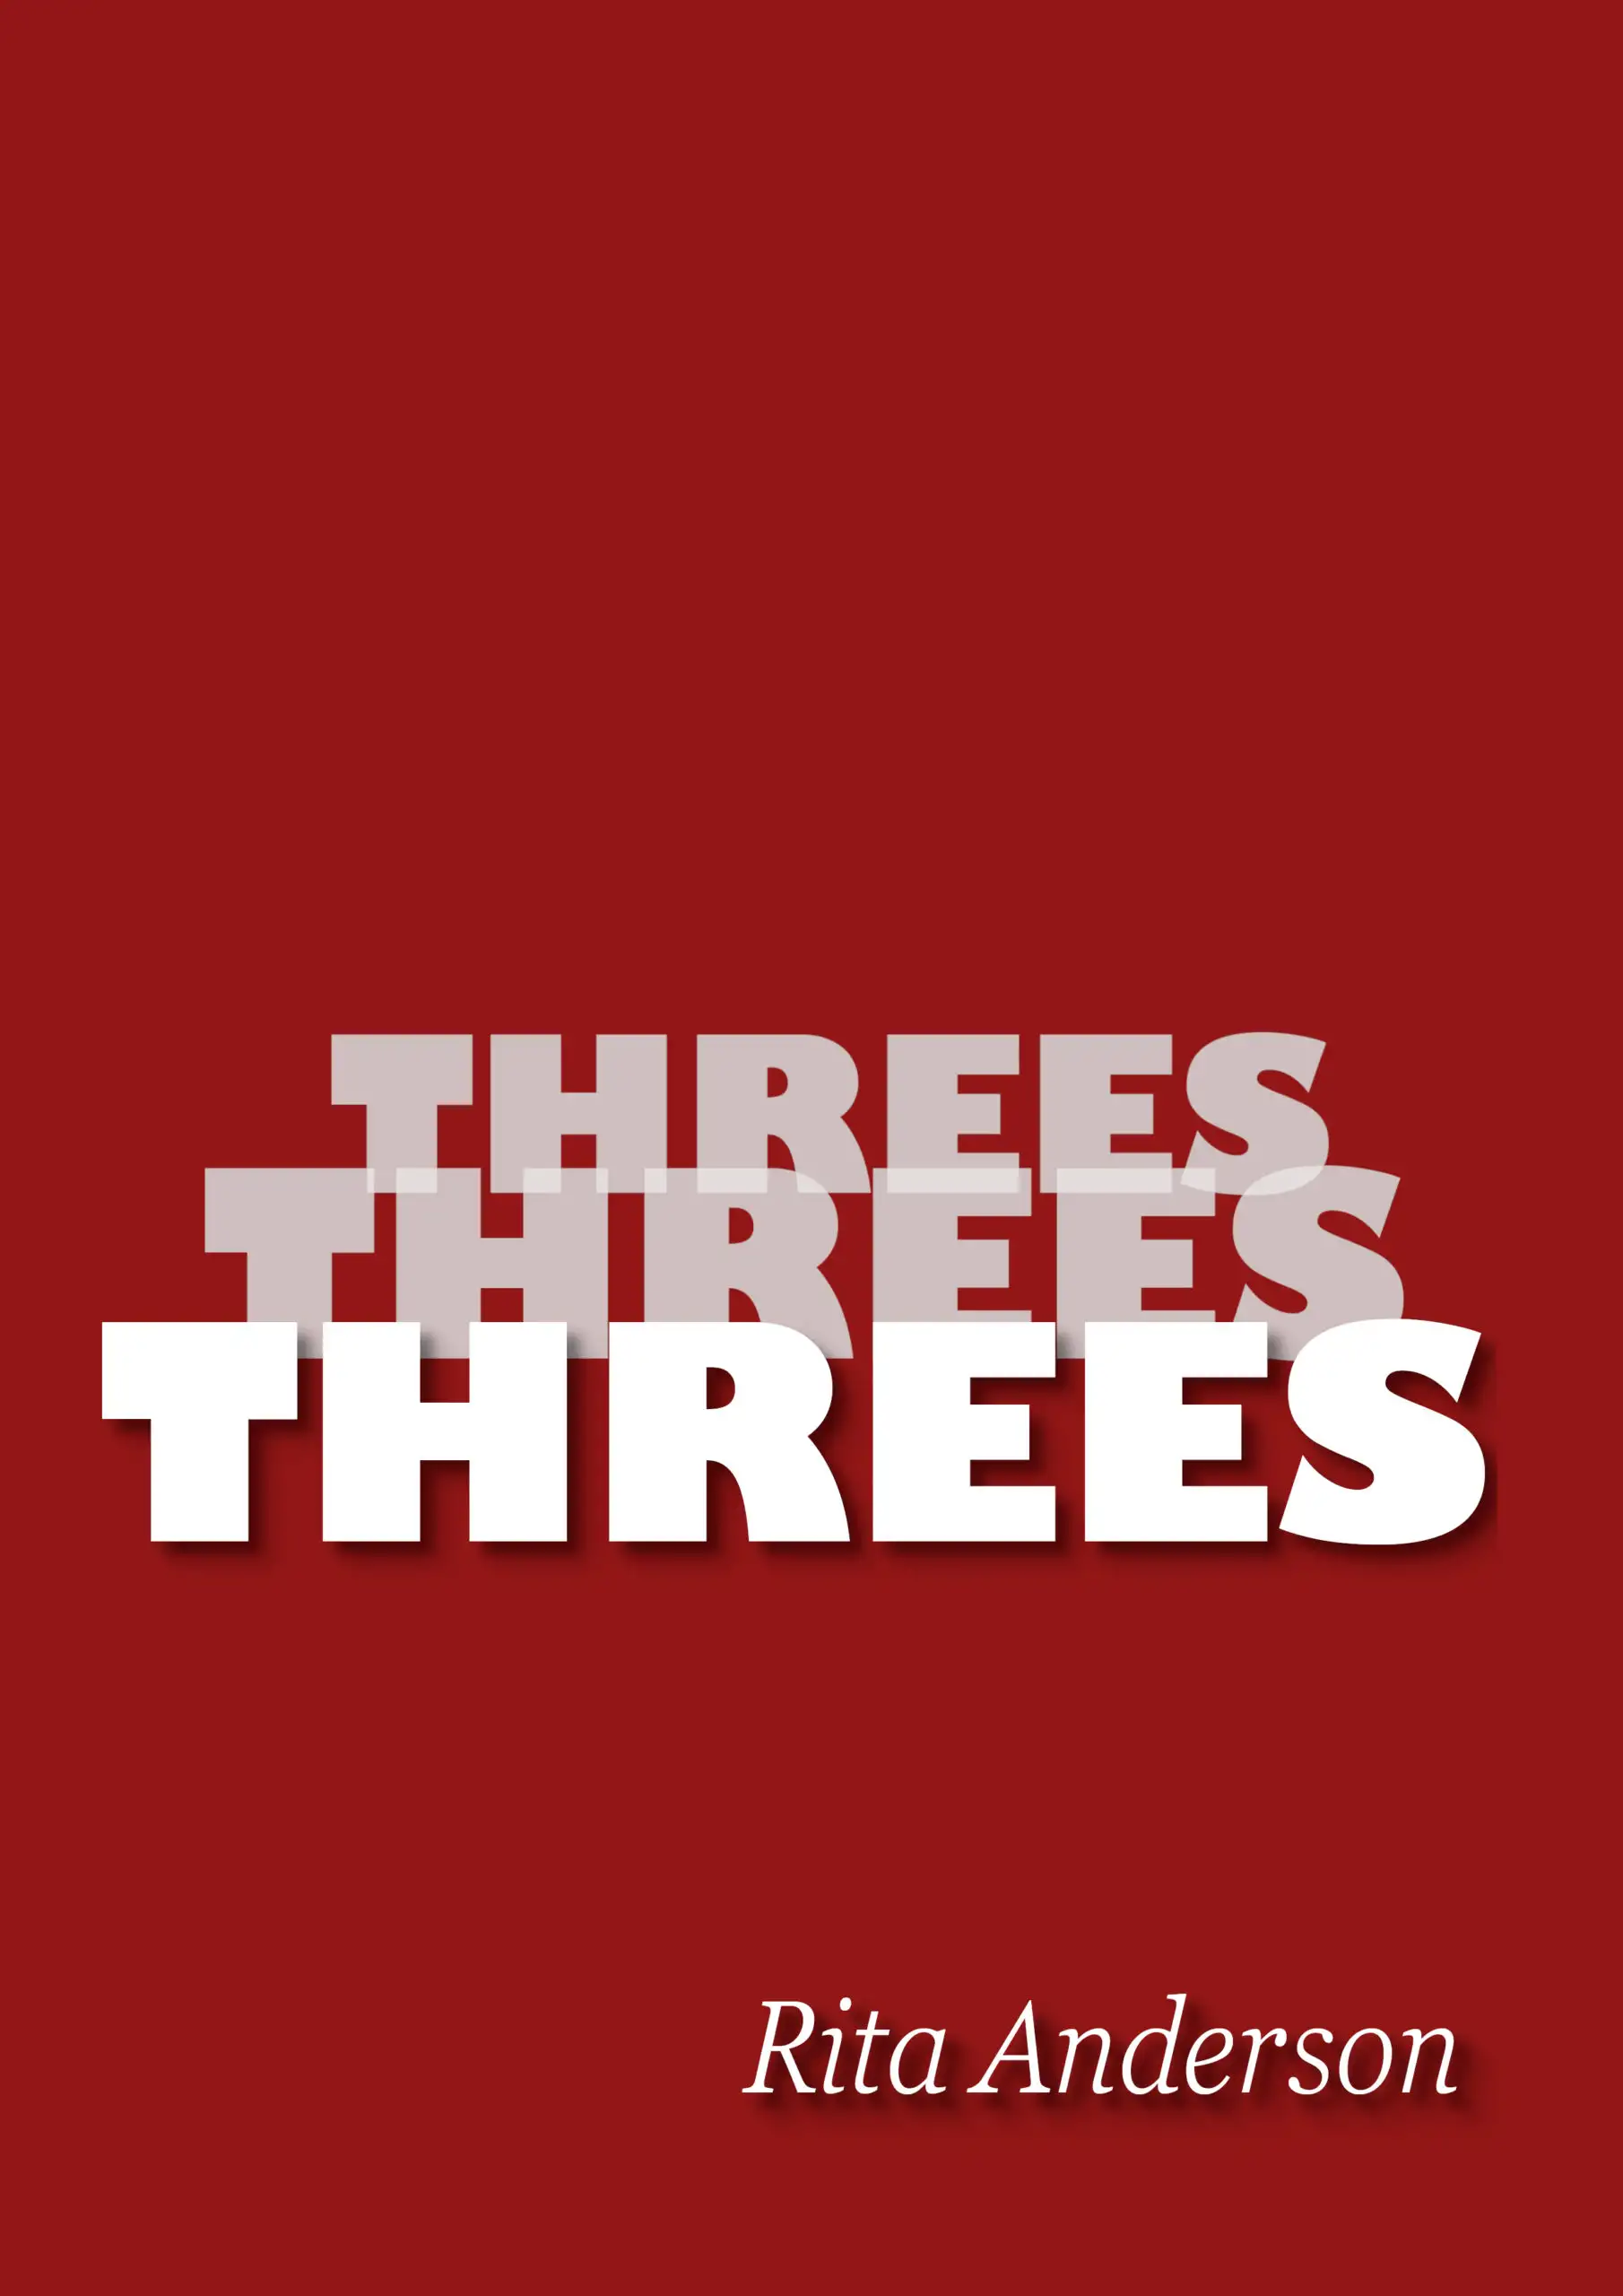 Threes - Dark Comedy set in an Obituary Office